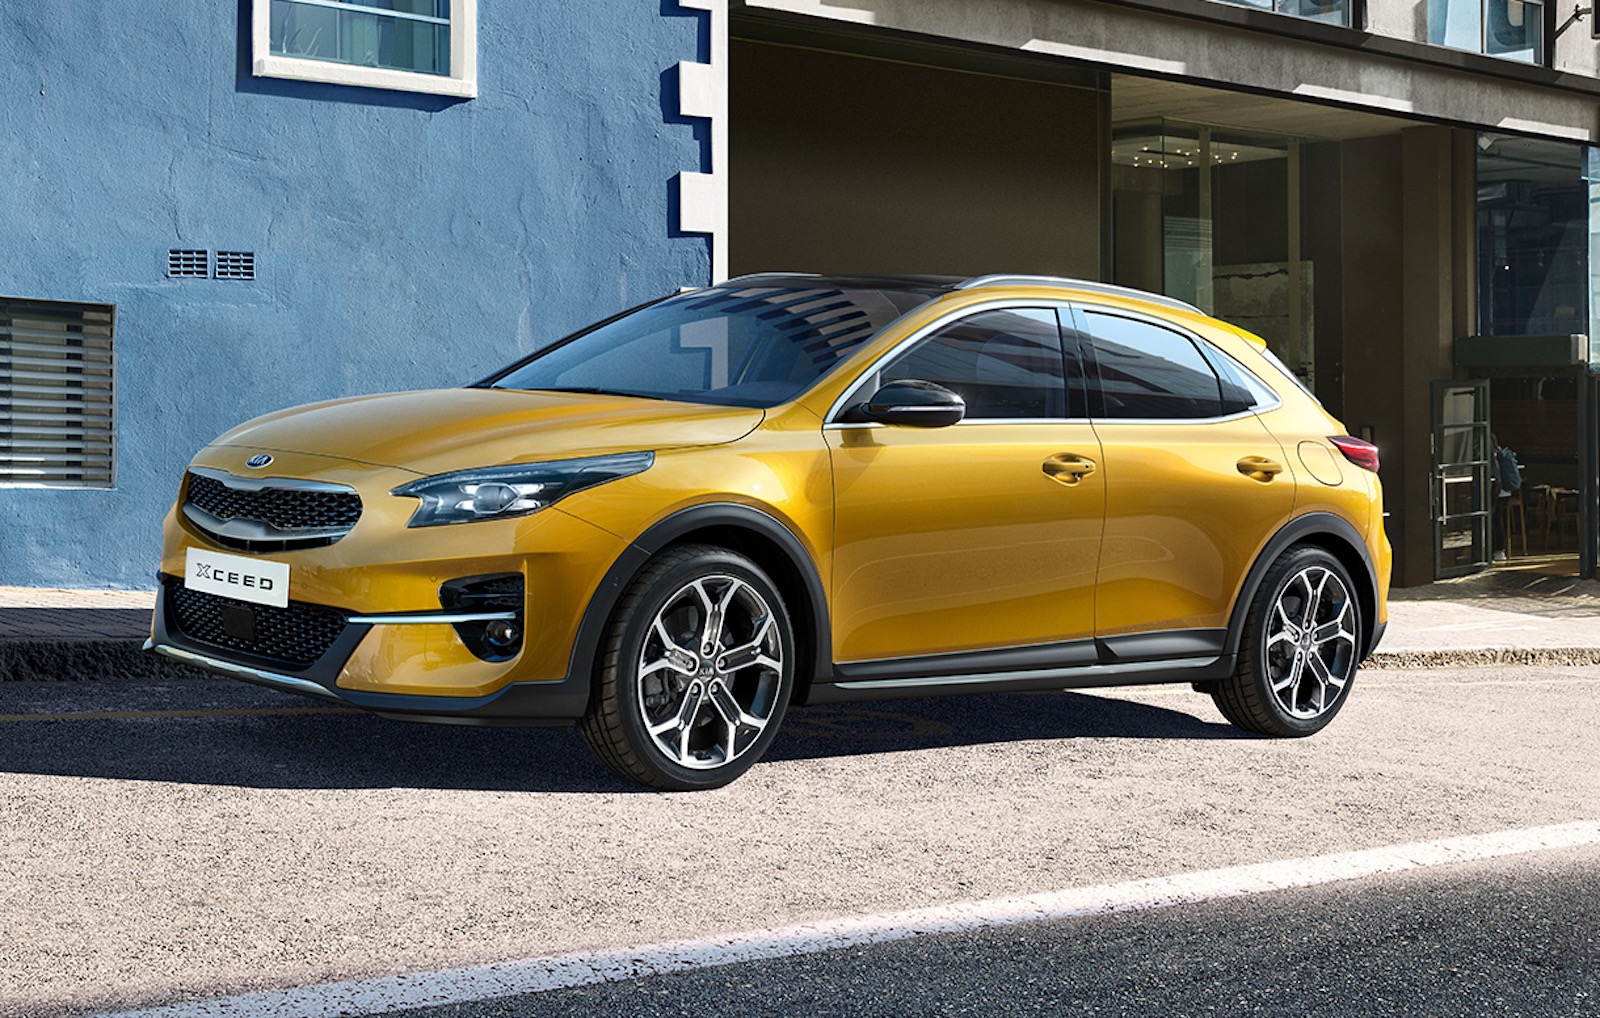 Kia XCeed revealed as stylish new small SUV for Europe